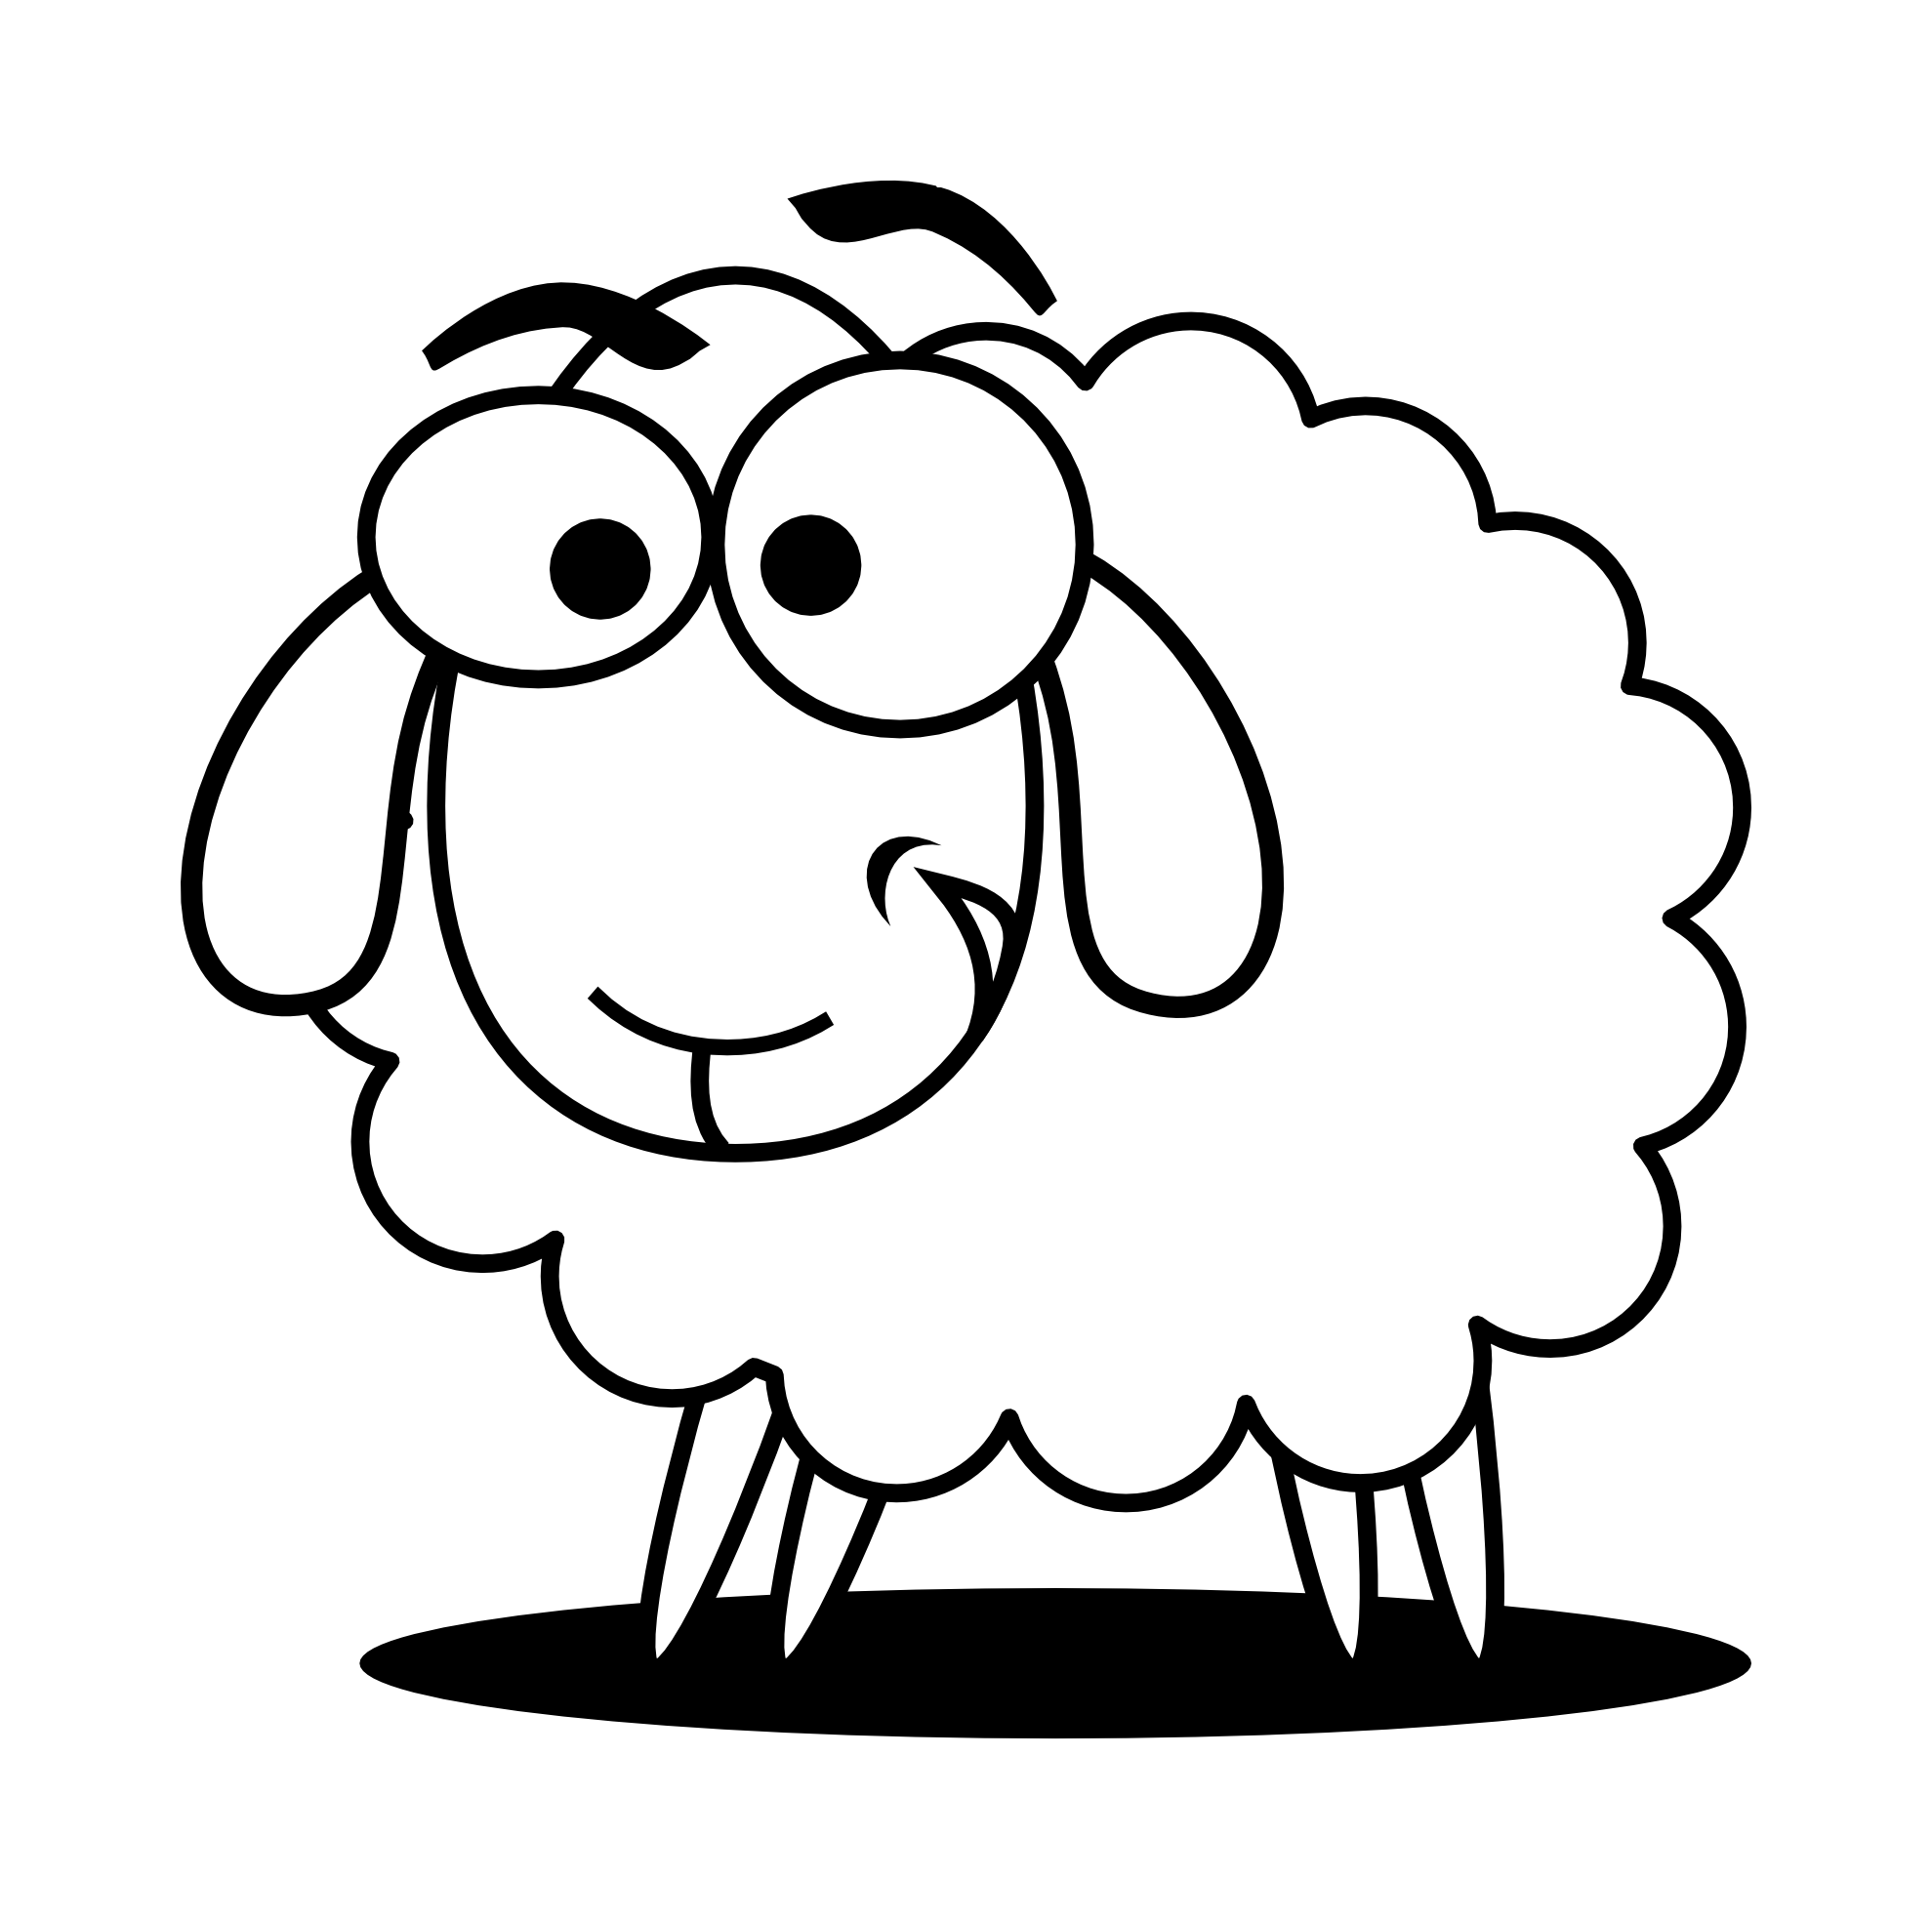 Sheep animal clipart sheep animals clip art downloadclipart org